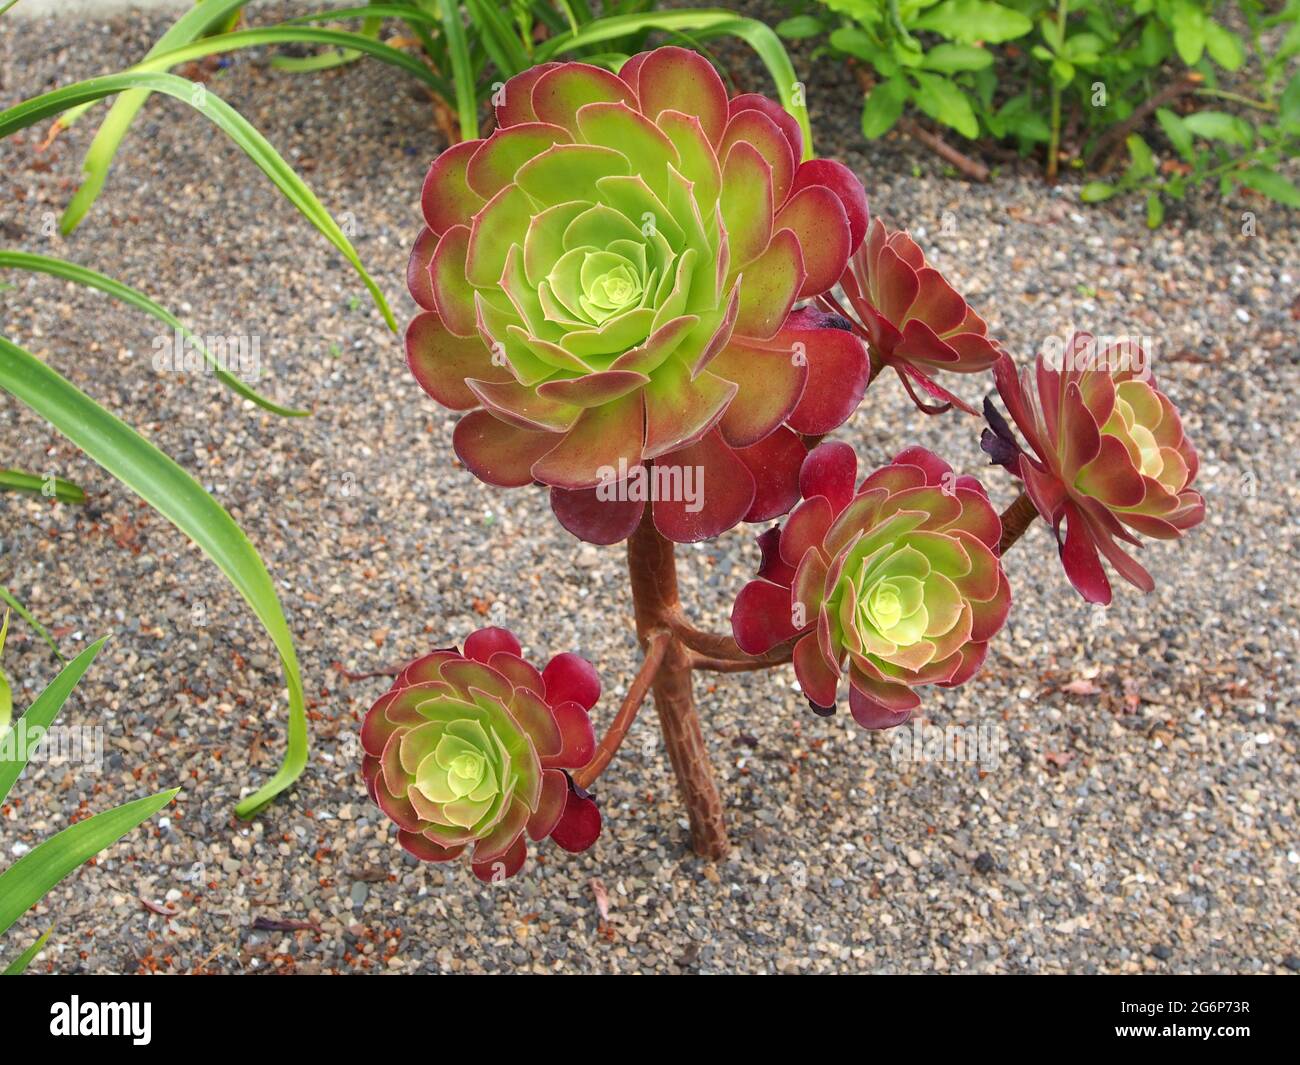 A green and red Aeonium Arboreum - a succulent suited to dry arid conditions named Arboreum because it is up on a stalk and can grow quite tall. Stock Photo